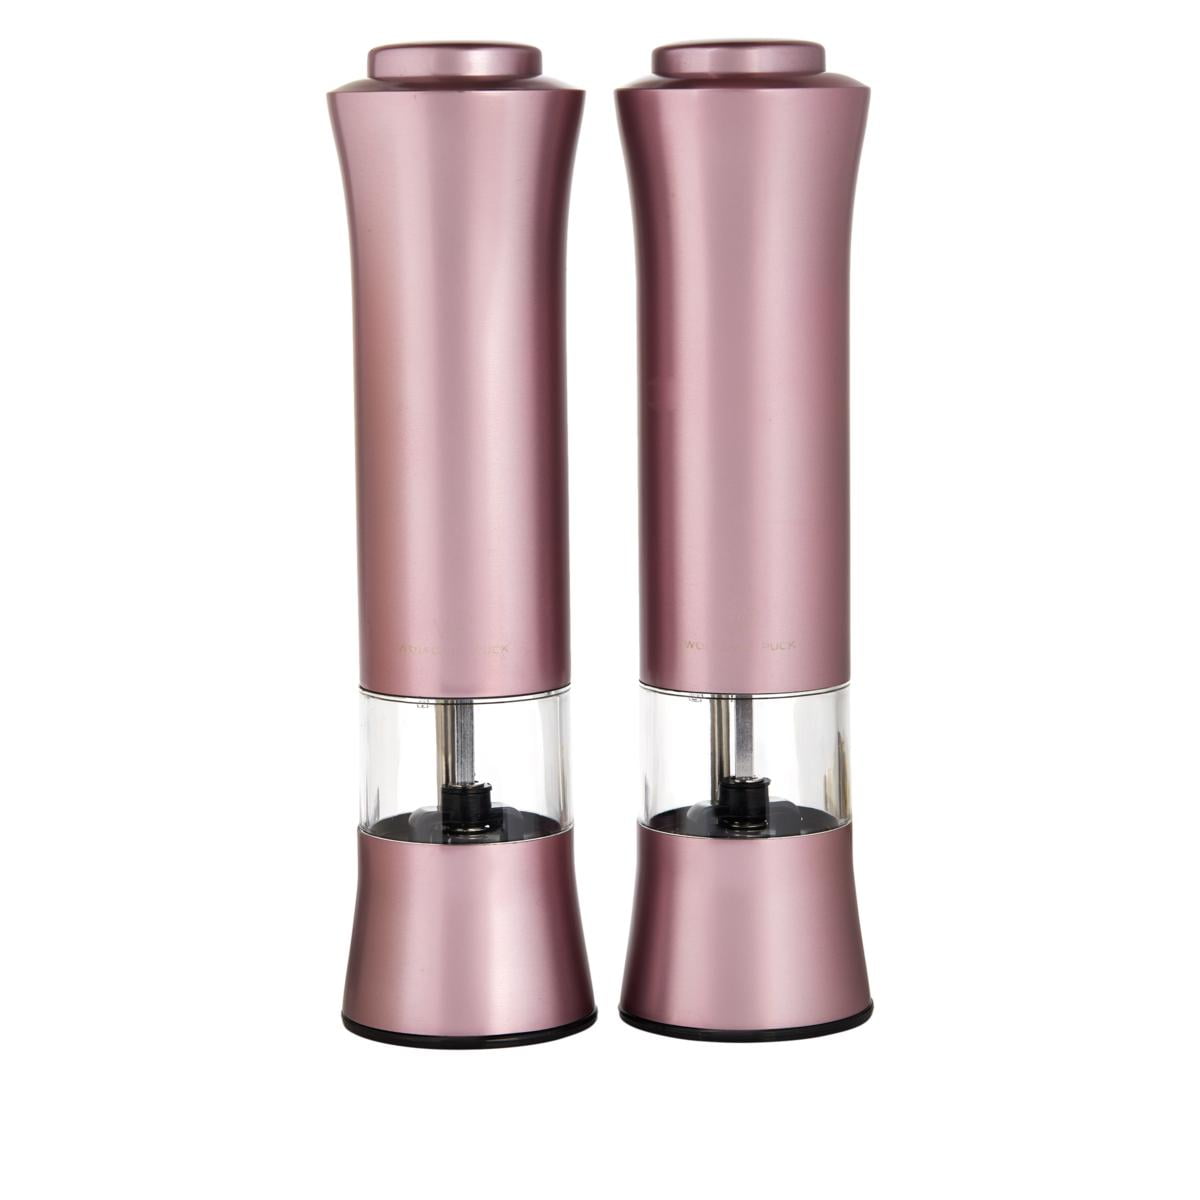 Wolfgang Puck 2-pack One-Button Touch Spice Mills (Renewed)